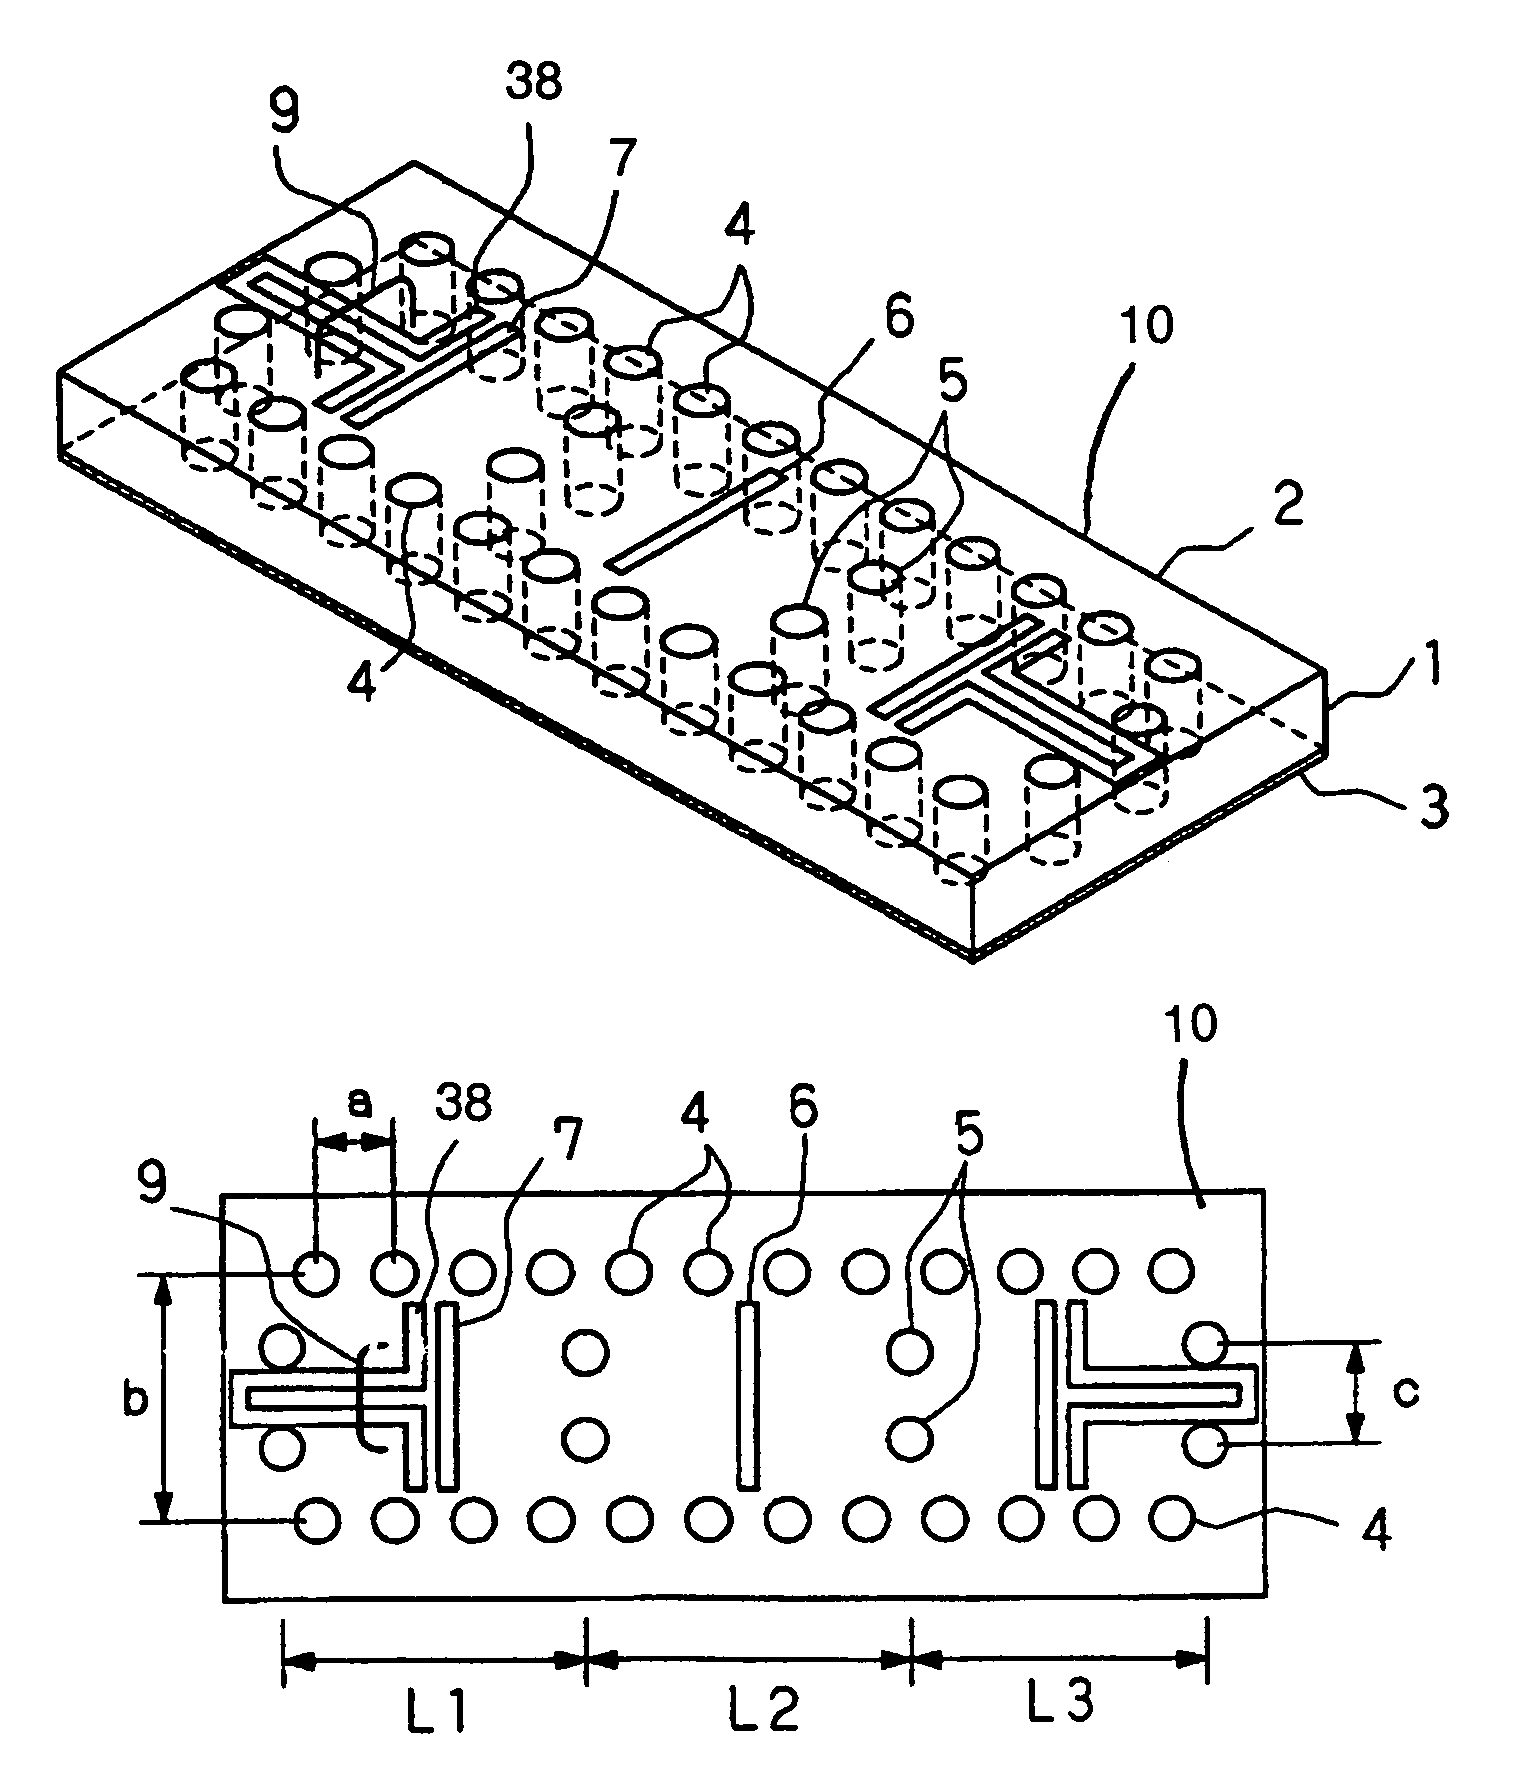 Dielectric waveguide filter with inductive windows and coplanar line coupling